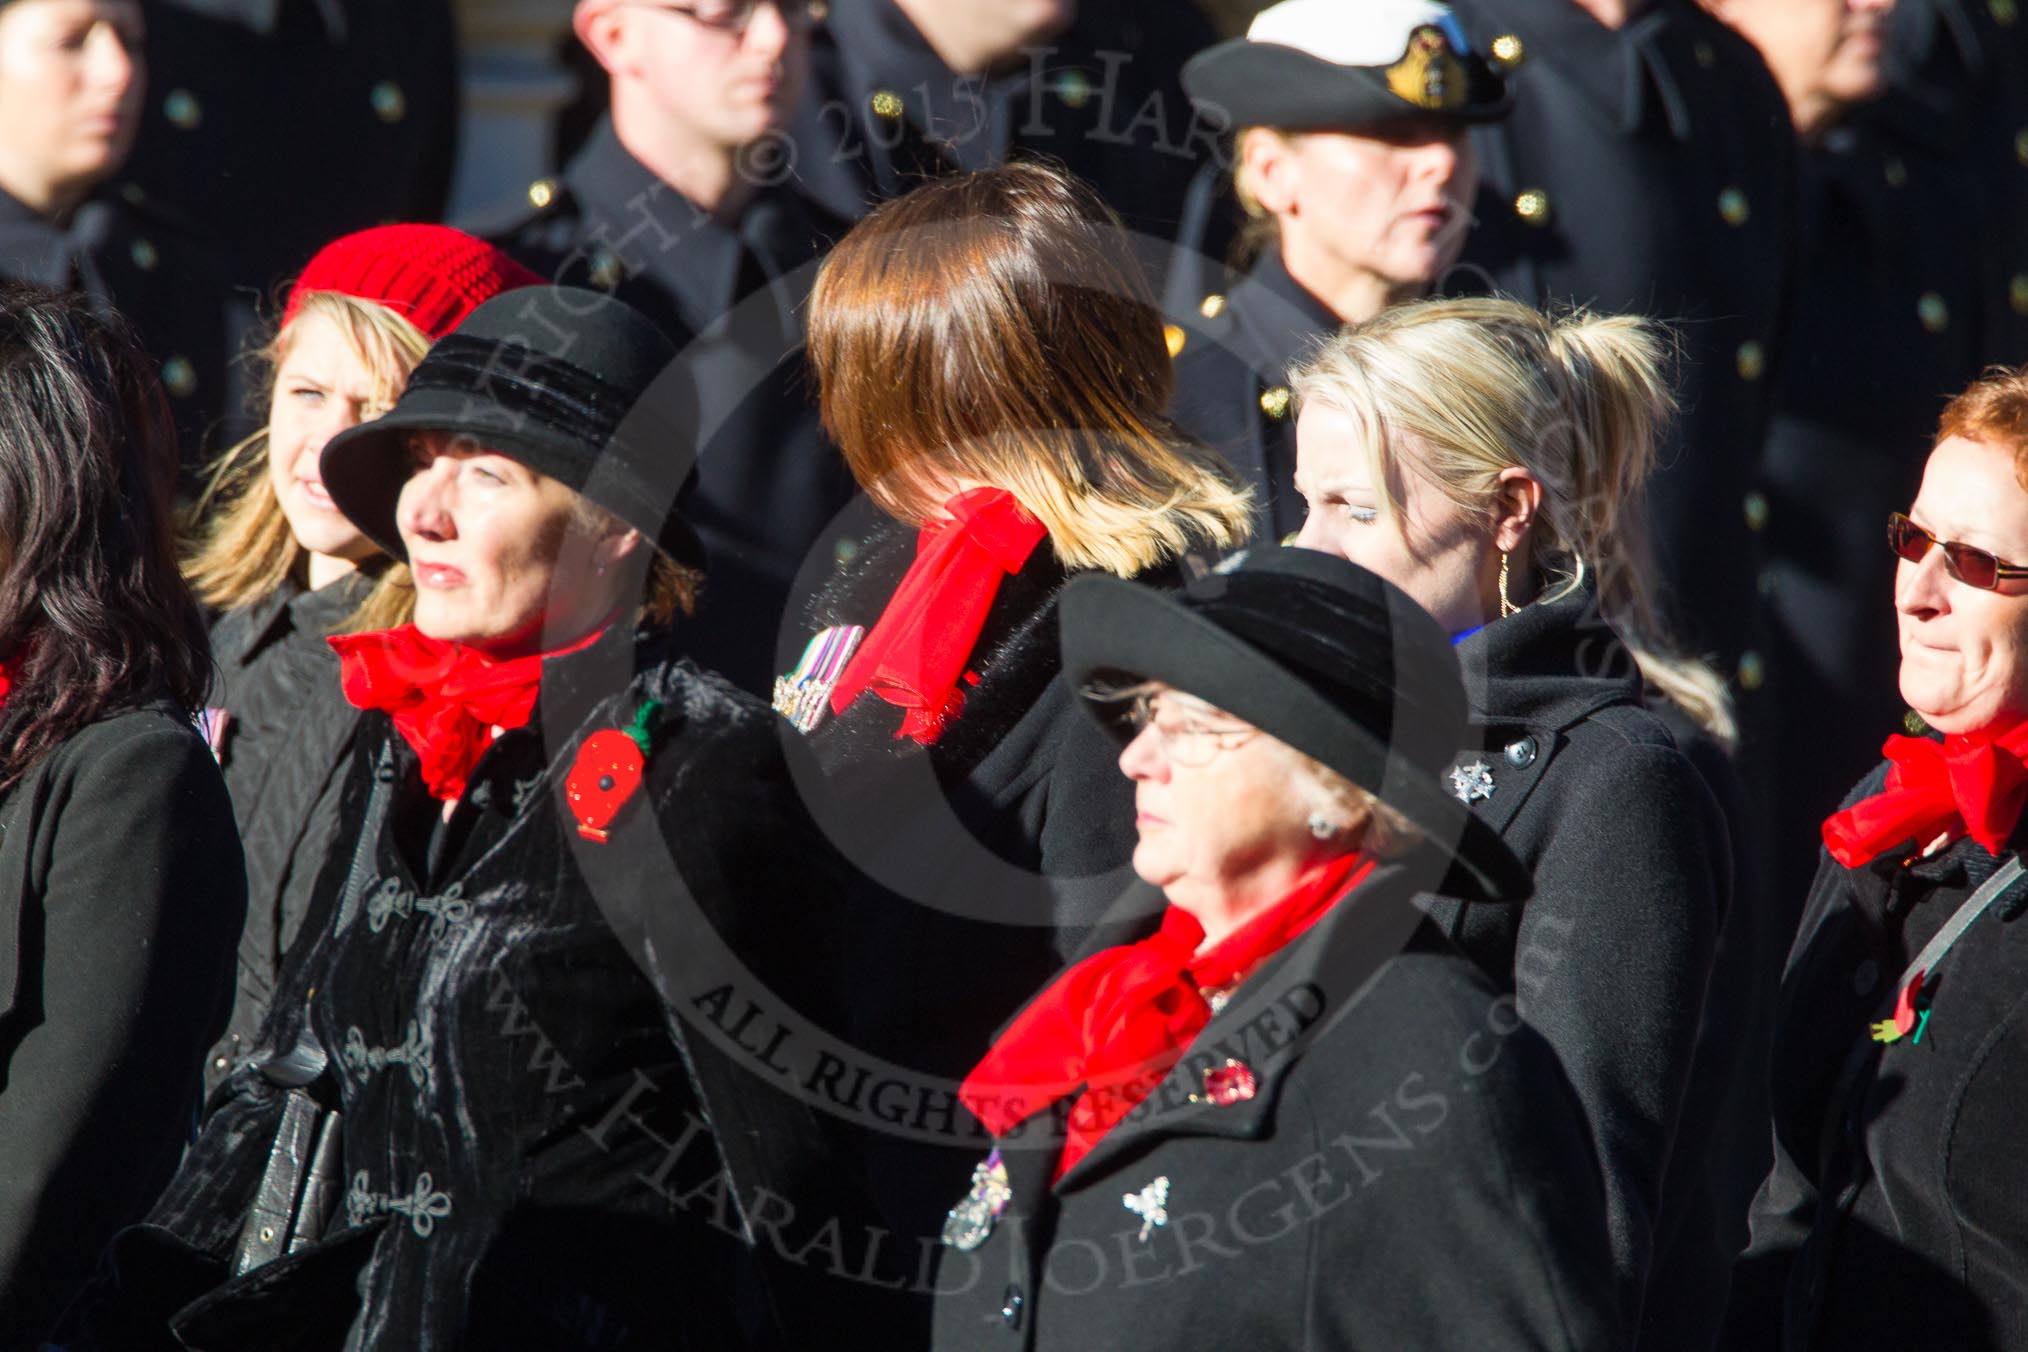 Remembrance Sunday Cenotaph March Past 2013: D1 - War Widows Association. The War Widows' Association exisits to improve the conditions of all War Widow/ers in the United Kingdom. The Association formed in 1971 following an article in a Sunday newspaper that highlighted the plight of Britain’s “forgotten women”. The Association gained charitable status in 1991 and continues to campaign against injustice..
Press stand opposite the Foreign Office building, Whitehall, London SW1,
London,
Greater London,
United Kingdom,
on 10 November 2013 at 11:38, image #23